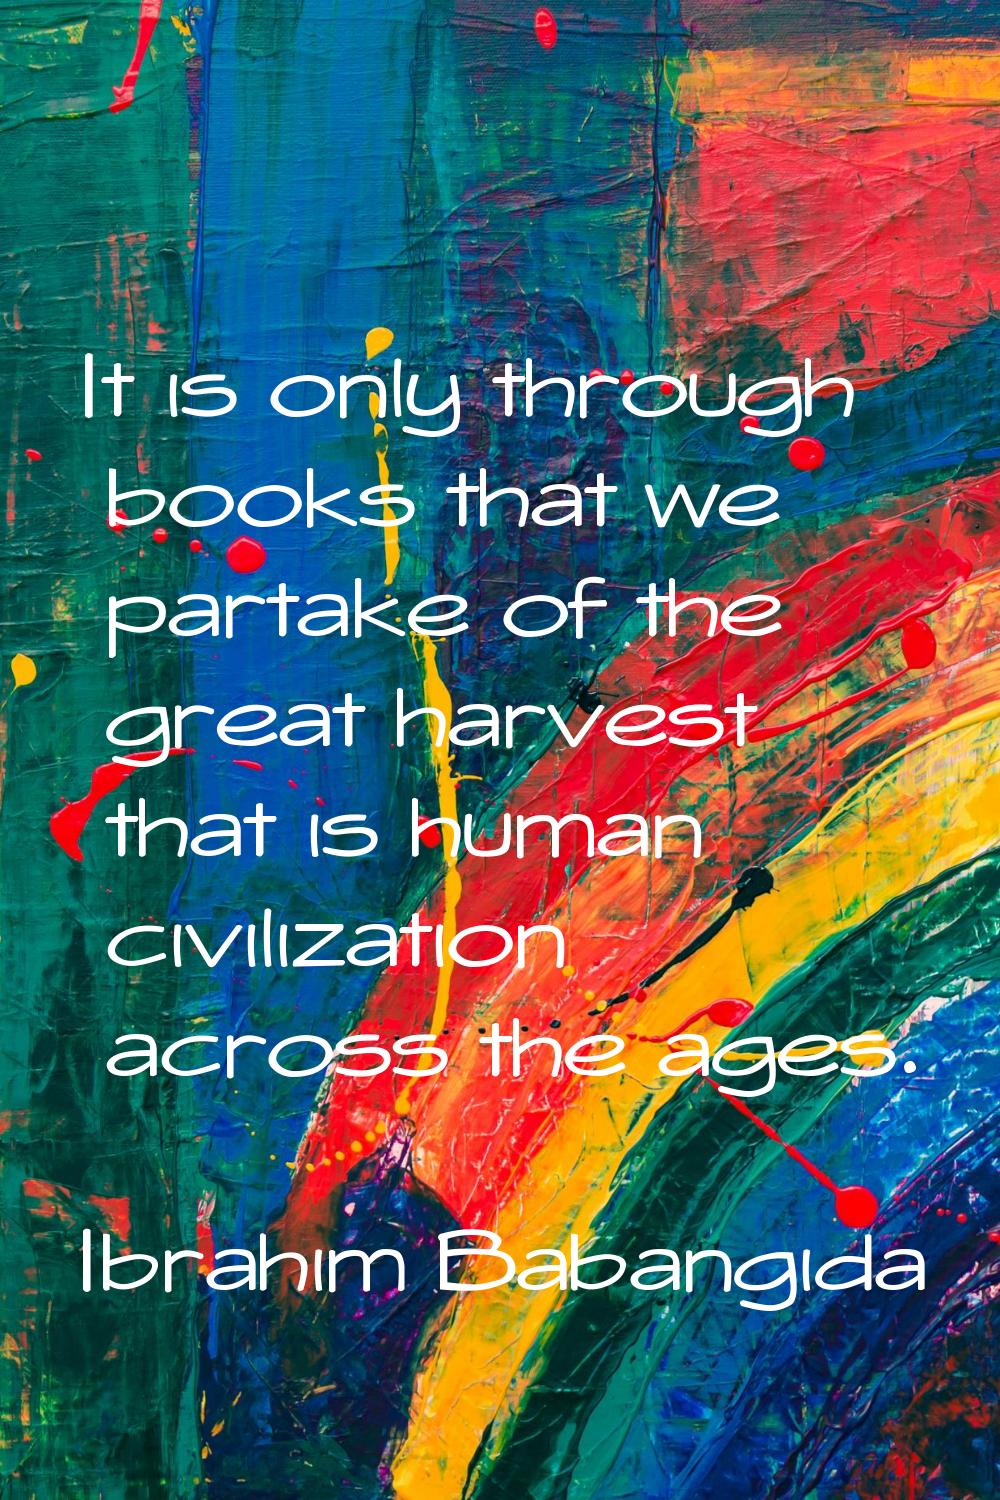 It is only through books that we partake of the great harvest that is human civilization across the